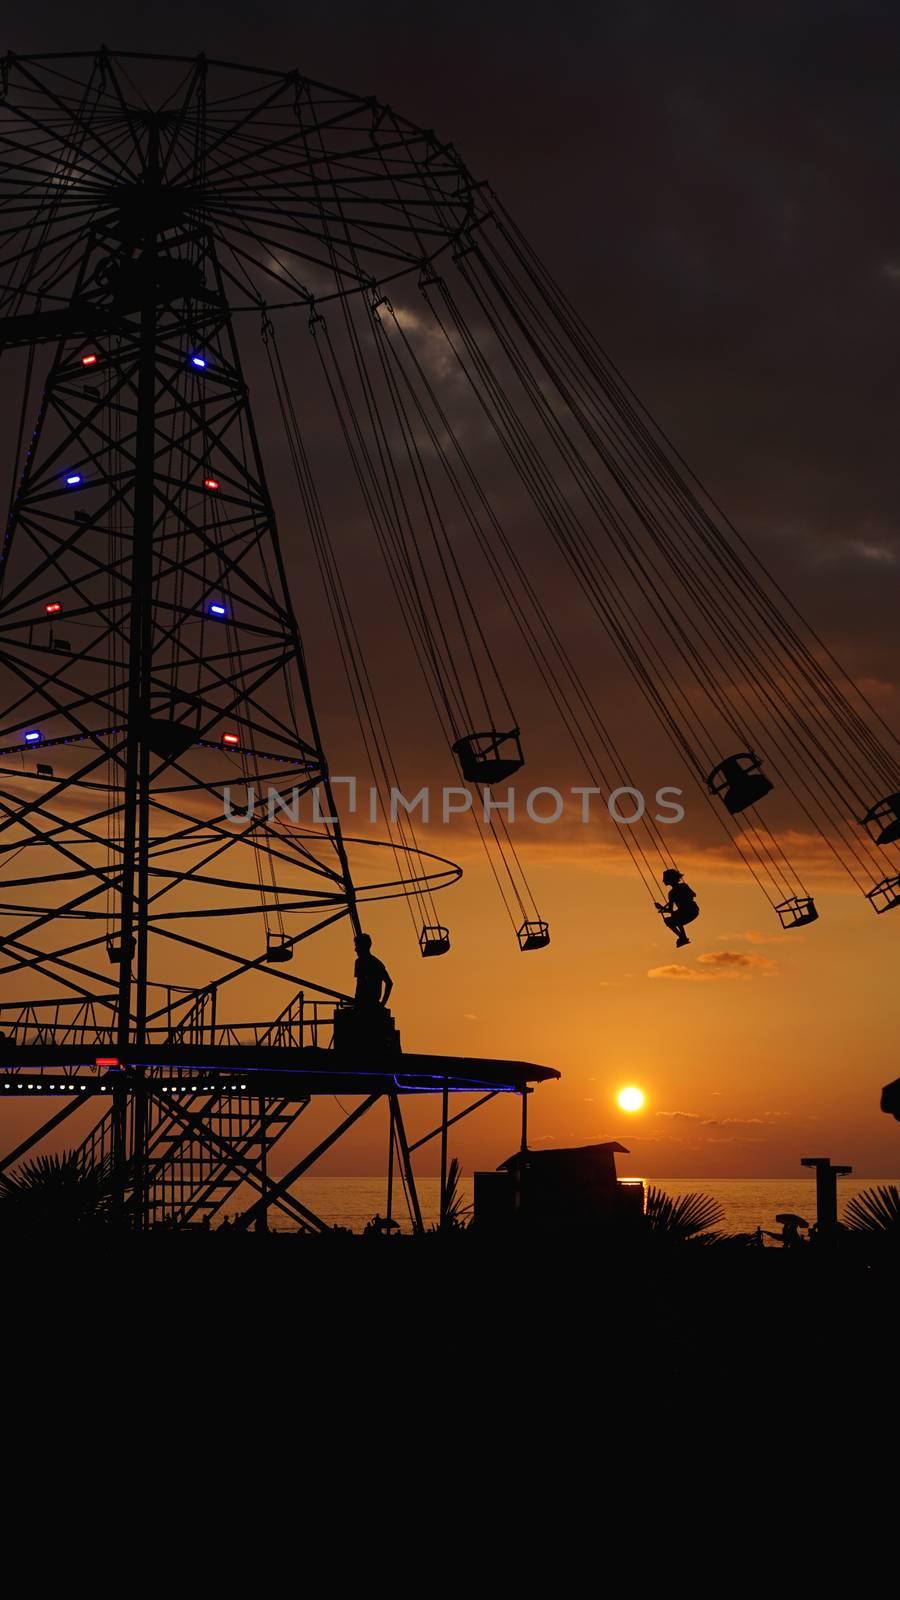 Swinging carousel roundabout chain ride at sunset by natali_brill